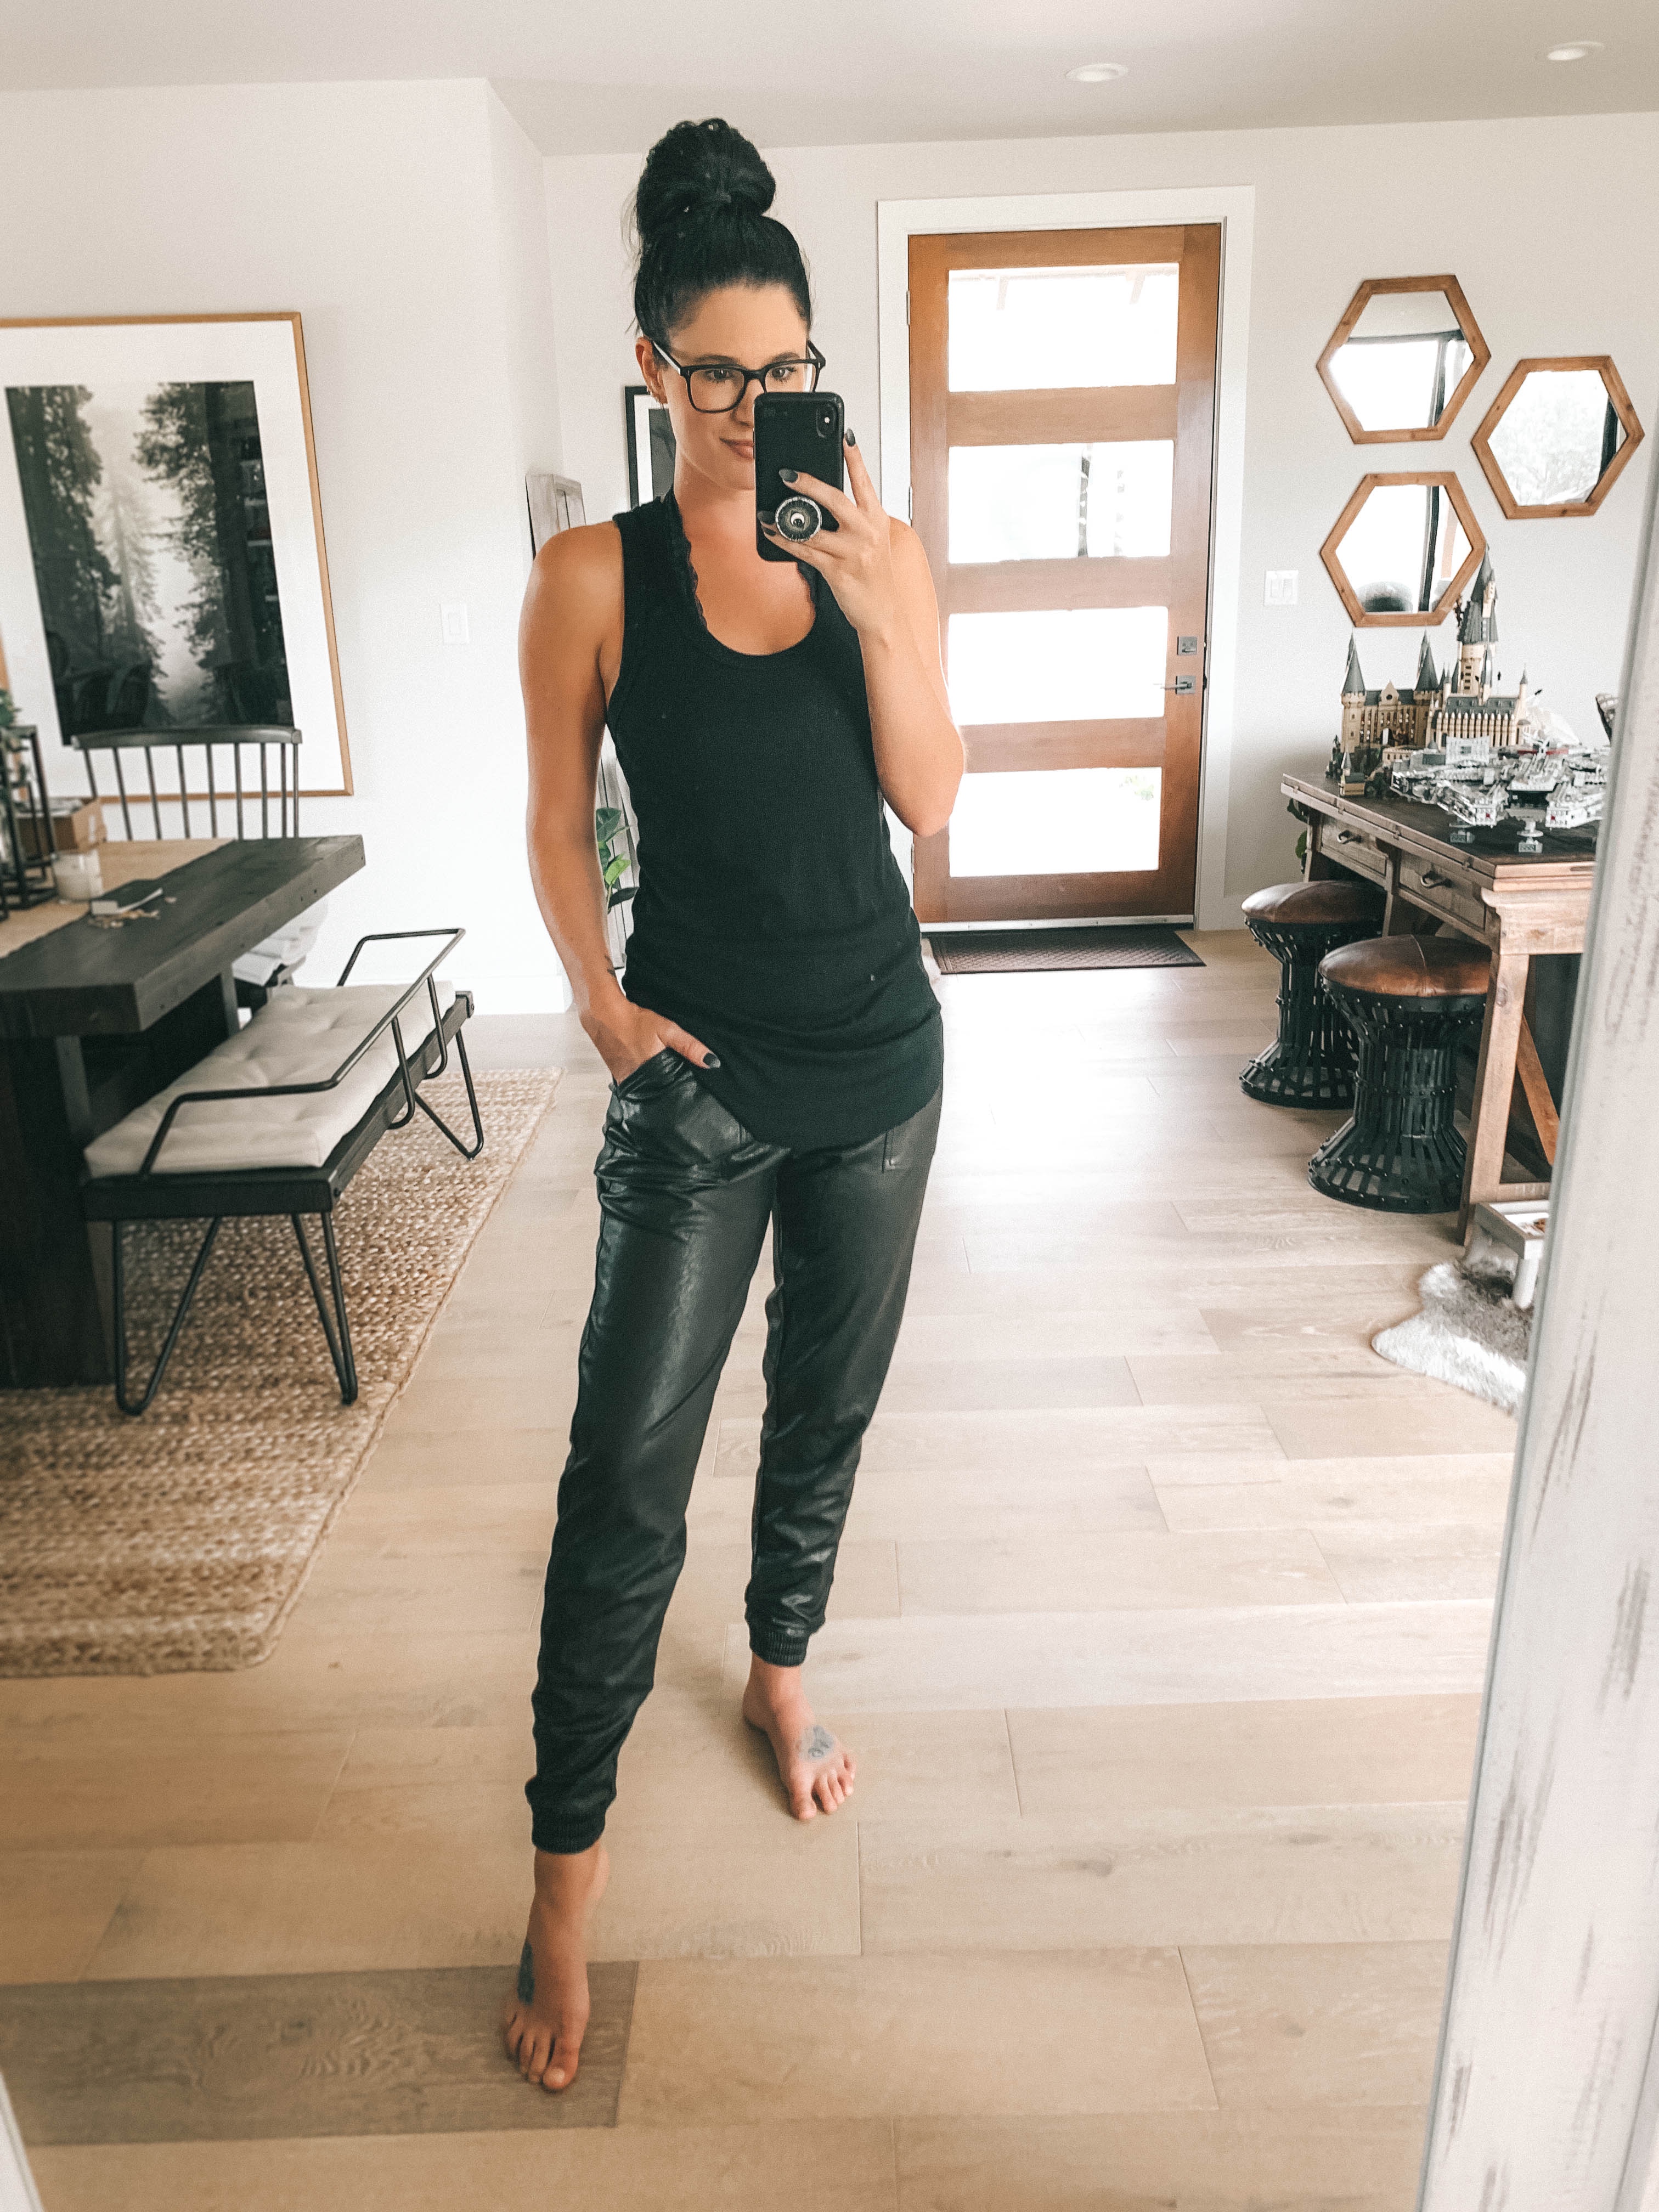 Must Have Spanx Faux Leather Joggers - Truly Megan